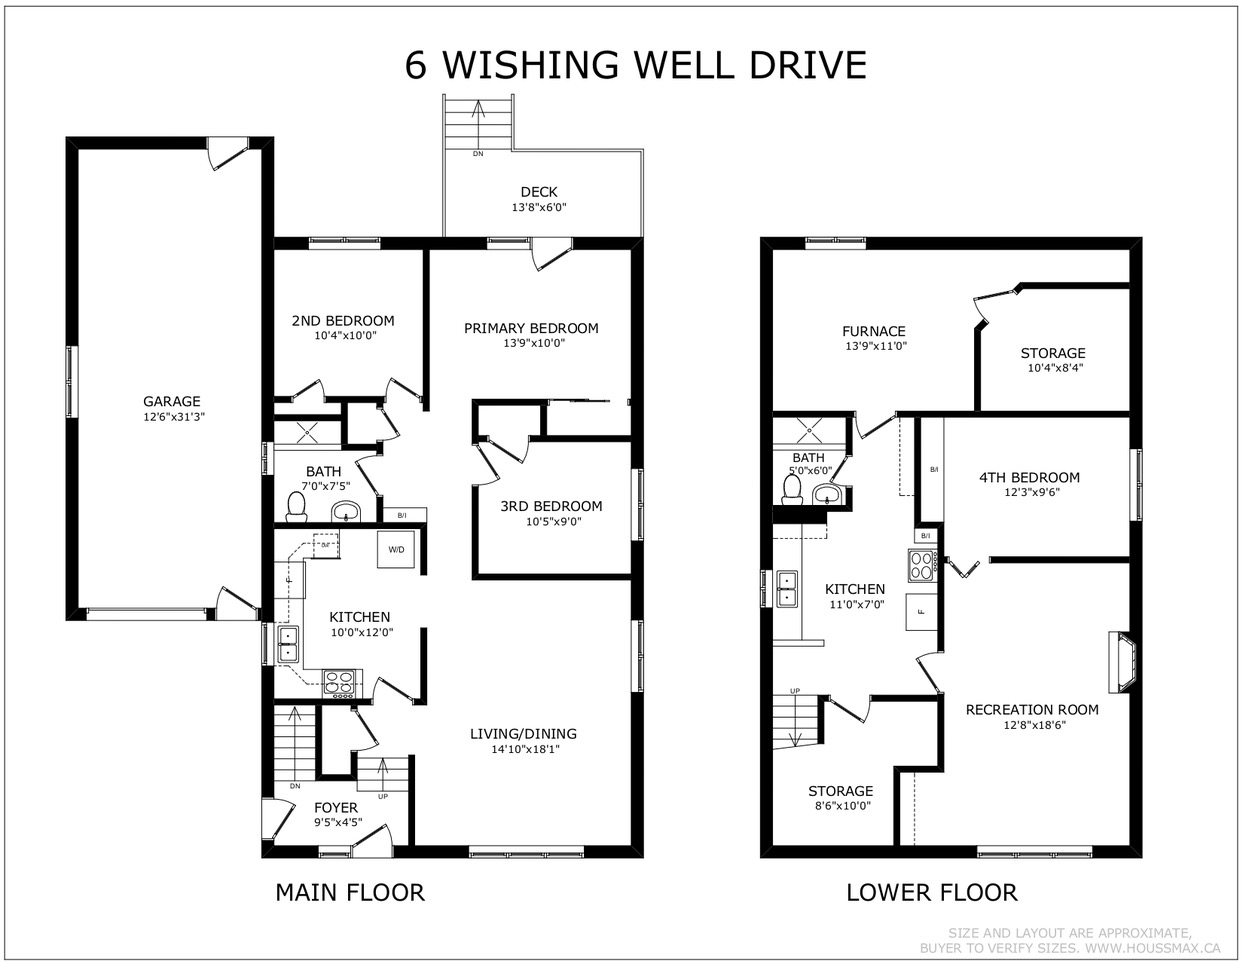 Floor plans for 6 Wishing Well Dr